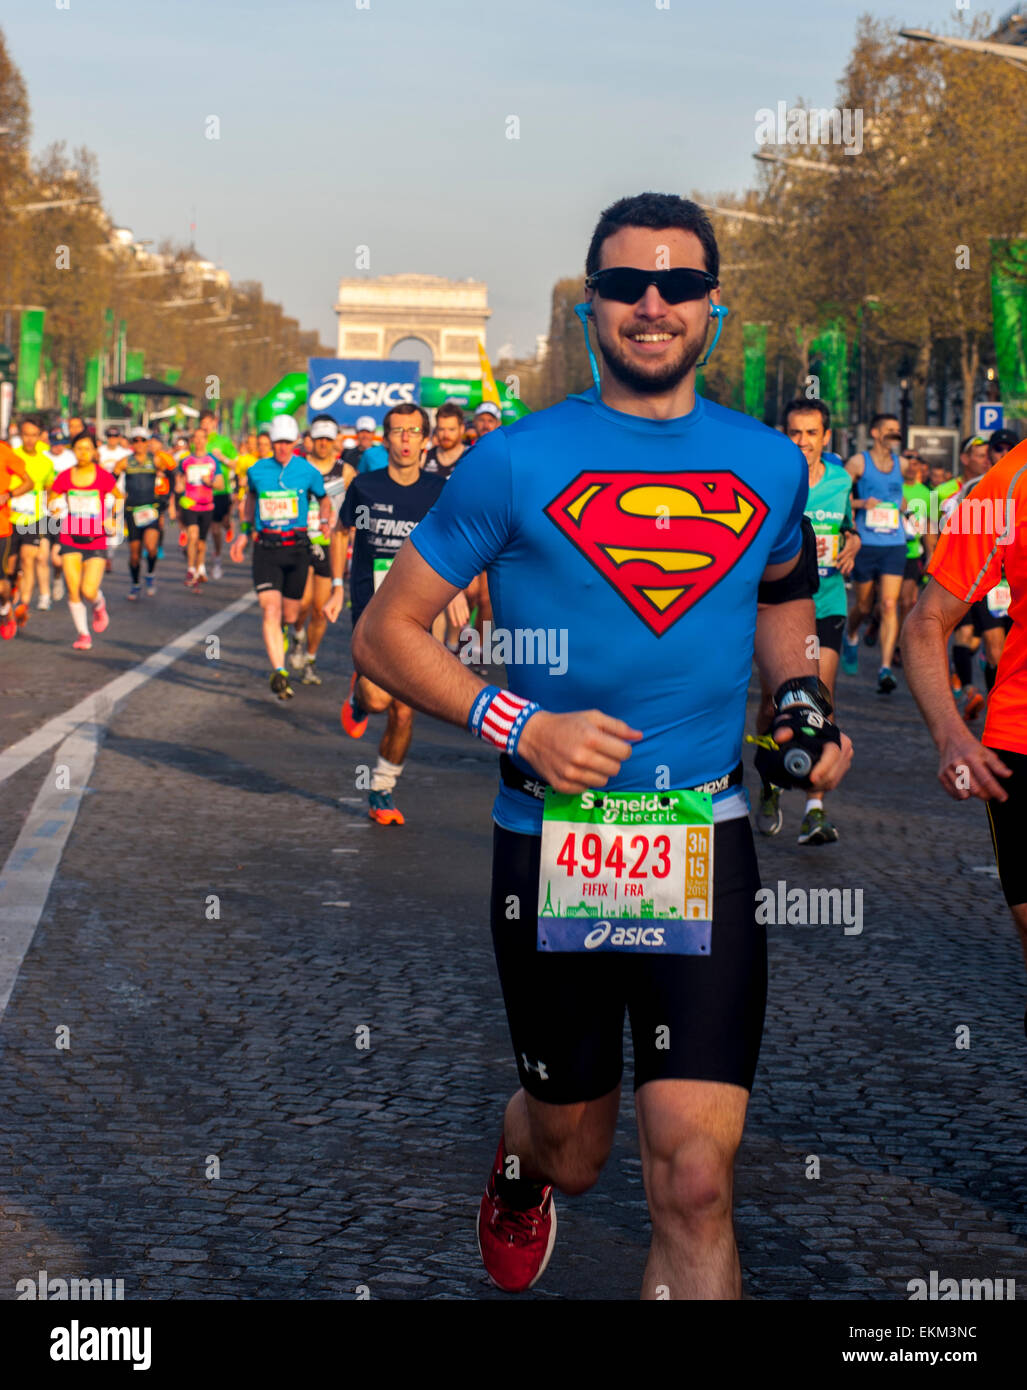 Paris, France. Marathon, Crowd Scene, Runners on Avenue Champs-Elysees,  Young Man Running in Superman T-Shirt Stock Photo - Alamy